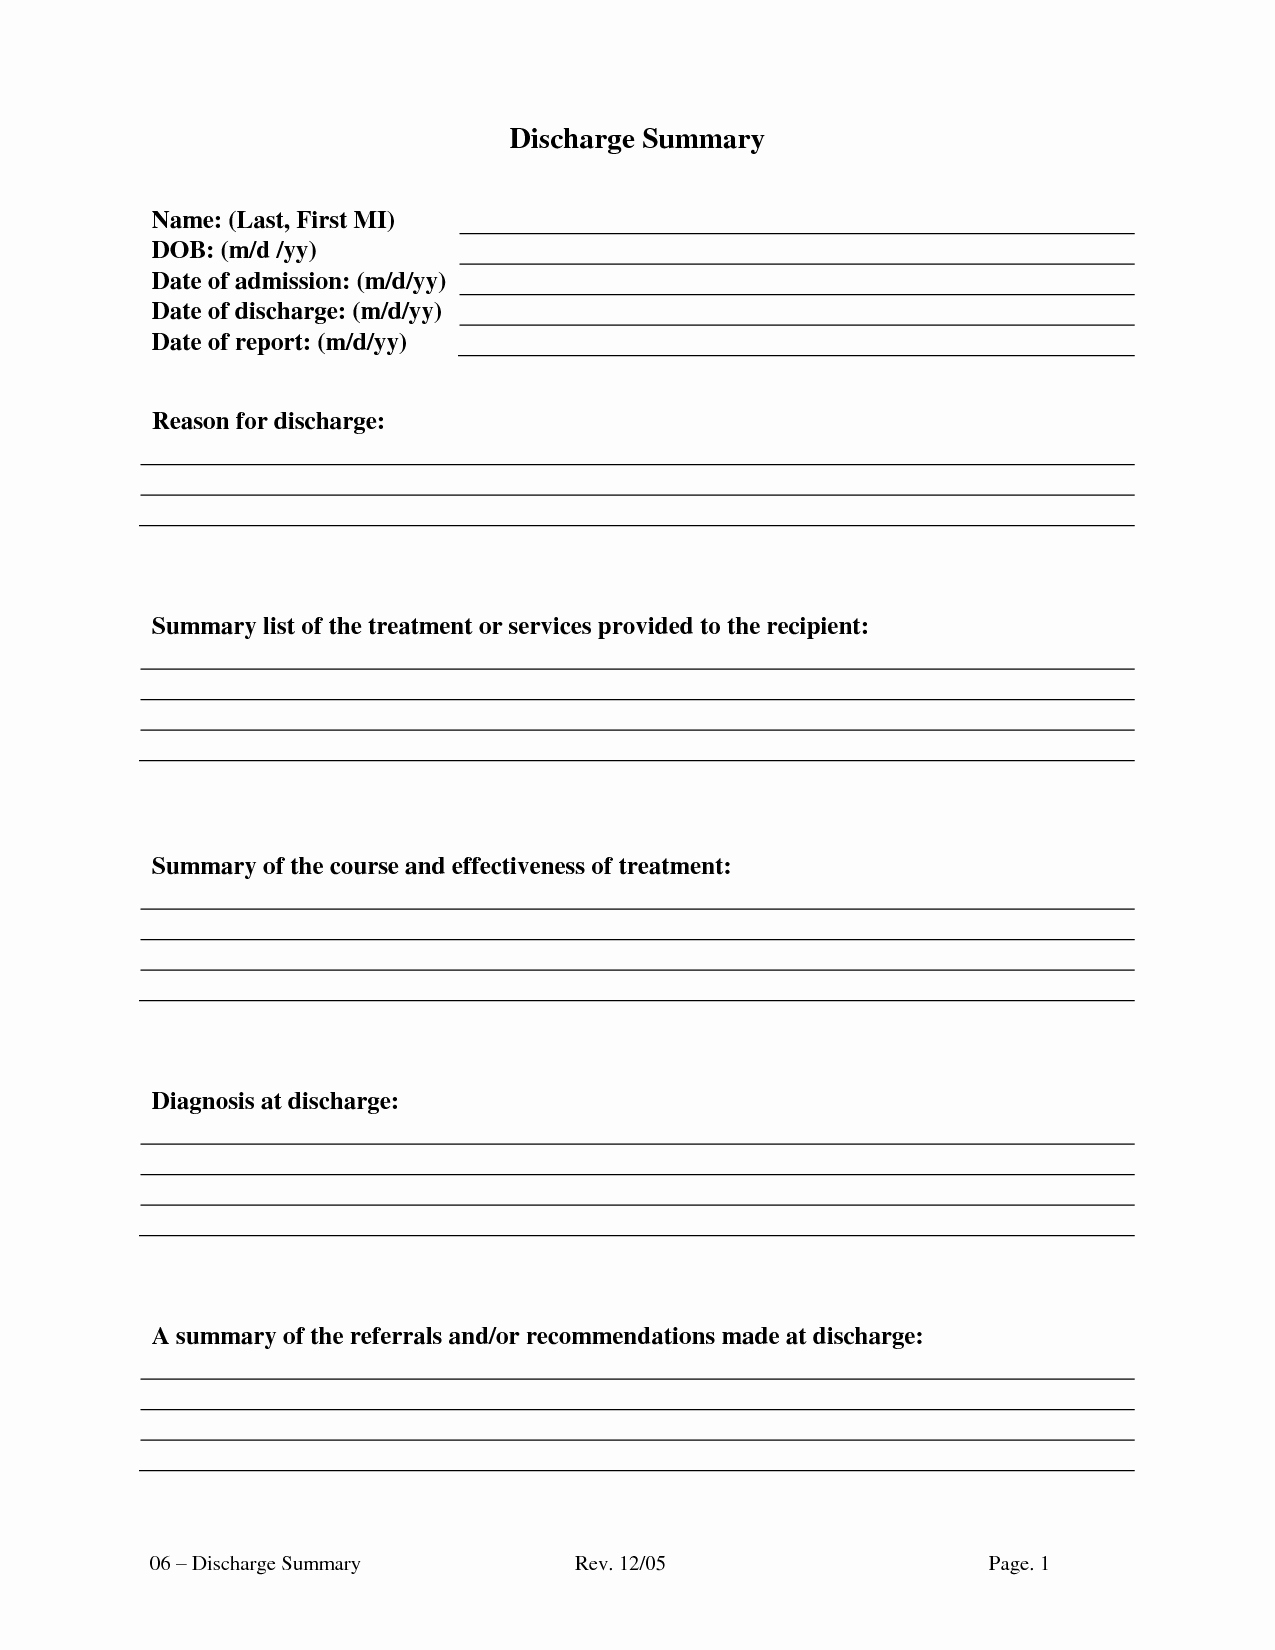 Hospital Discharge Summary Template Unique Discharge Summary Template